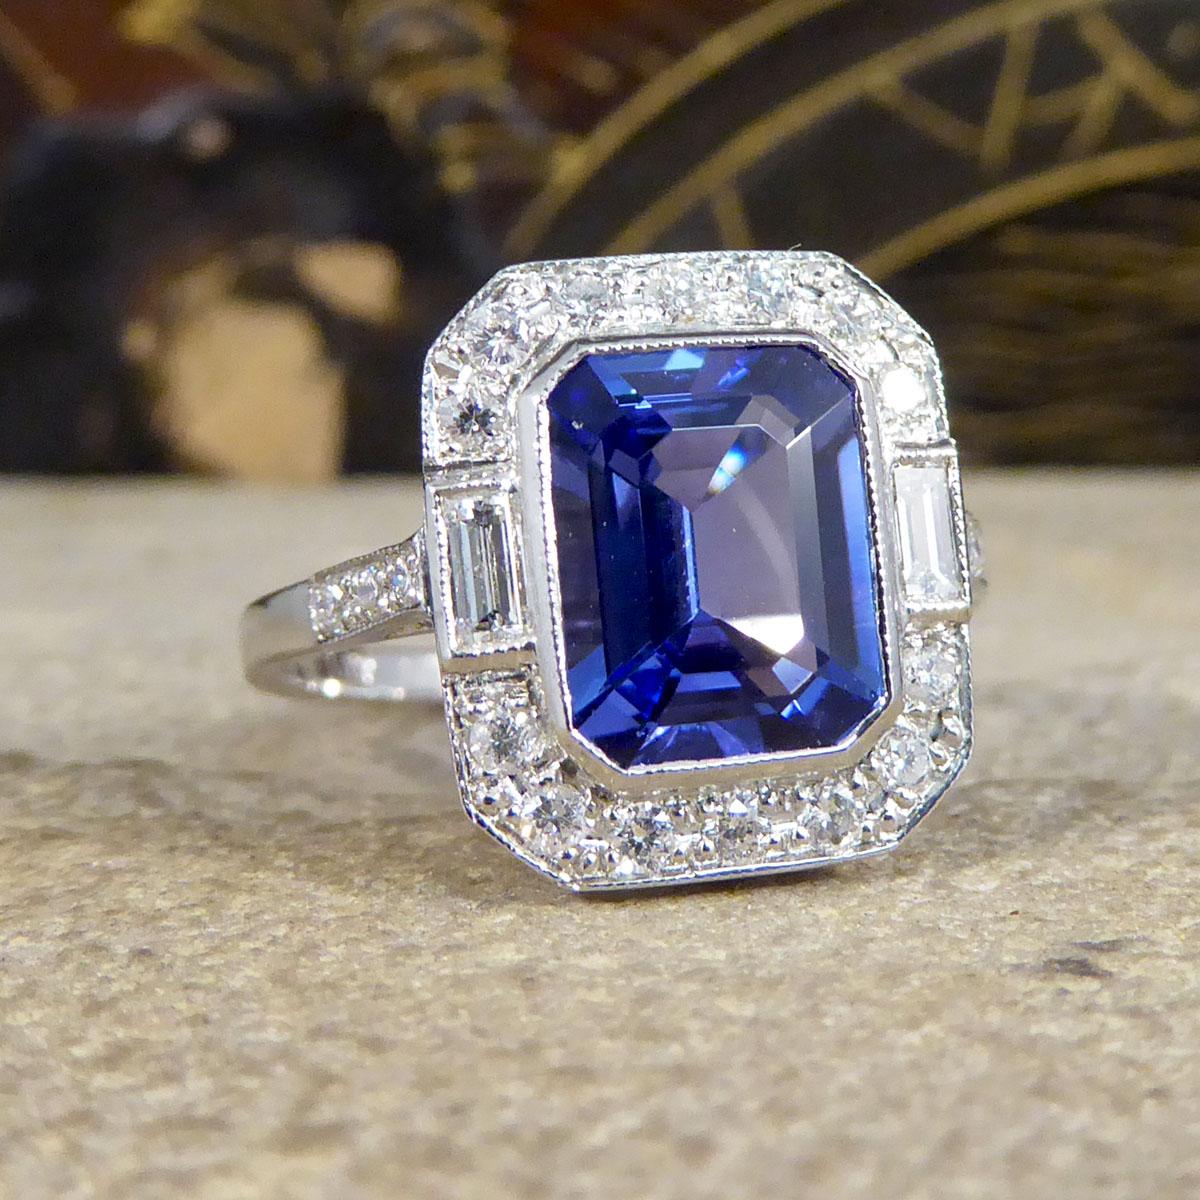 This statement cluster ring holds a 2.20ct Emerald Cut Tanzanite in a rub over collar setting with a Diamond surround. With a total Diamond weight of 0.50ct, these modern brilliant cut and baguette cut diamonds create an extra sparkle to this